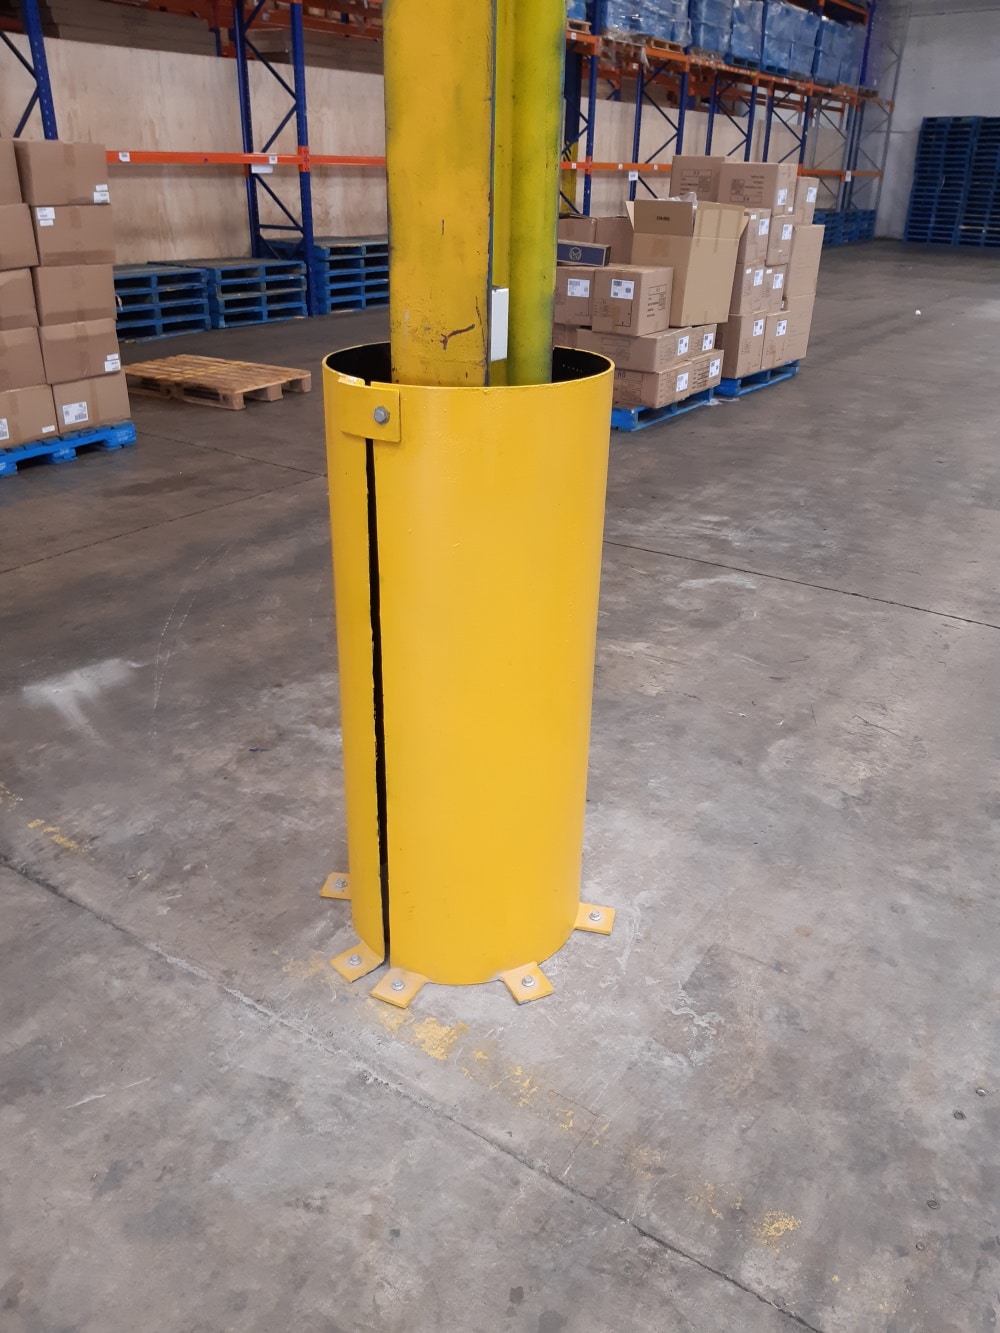 Bollard for warehouse - Cost effective protection for posts